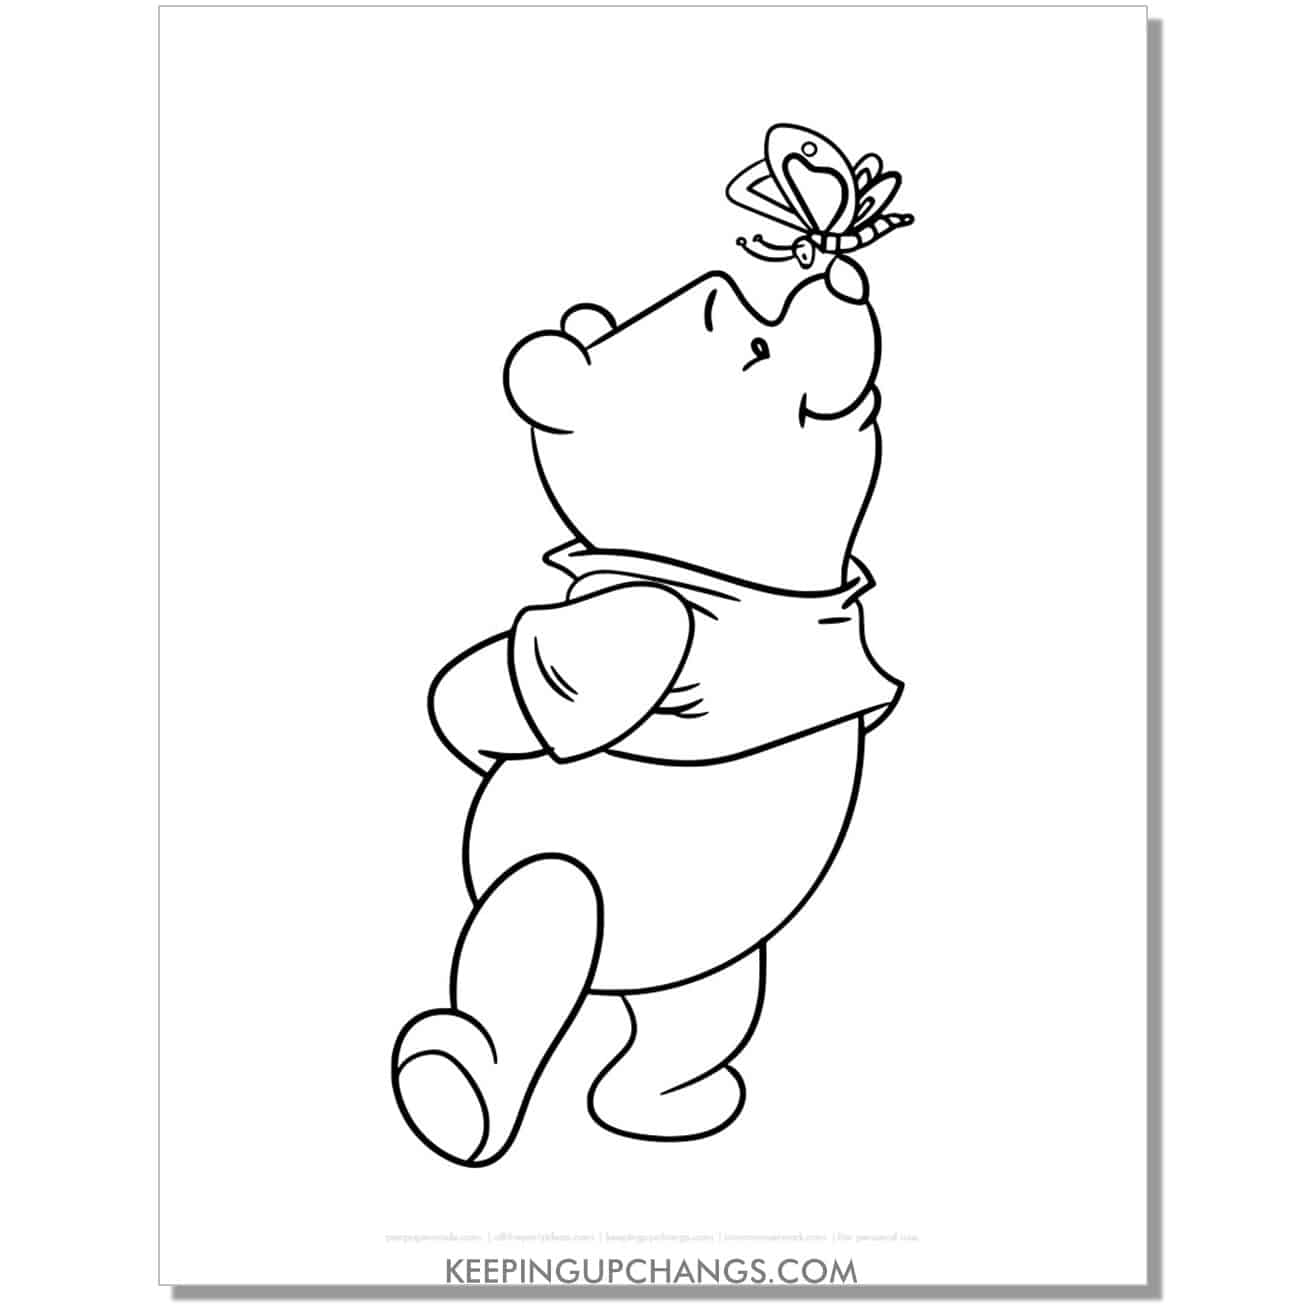 winnie the pooh with butterfly on nose coloring page, sheet.